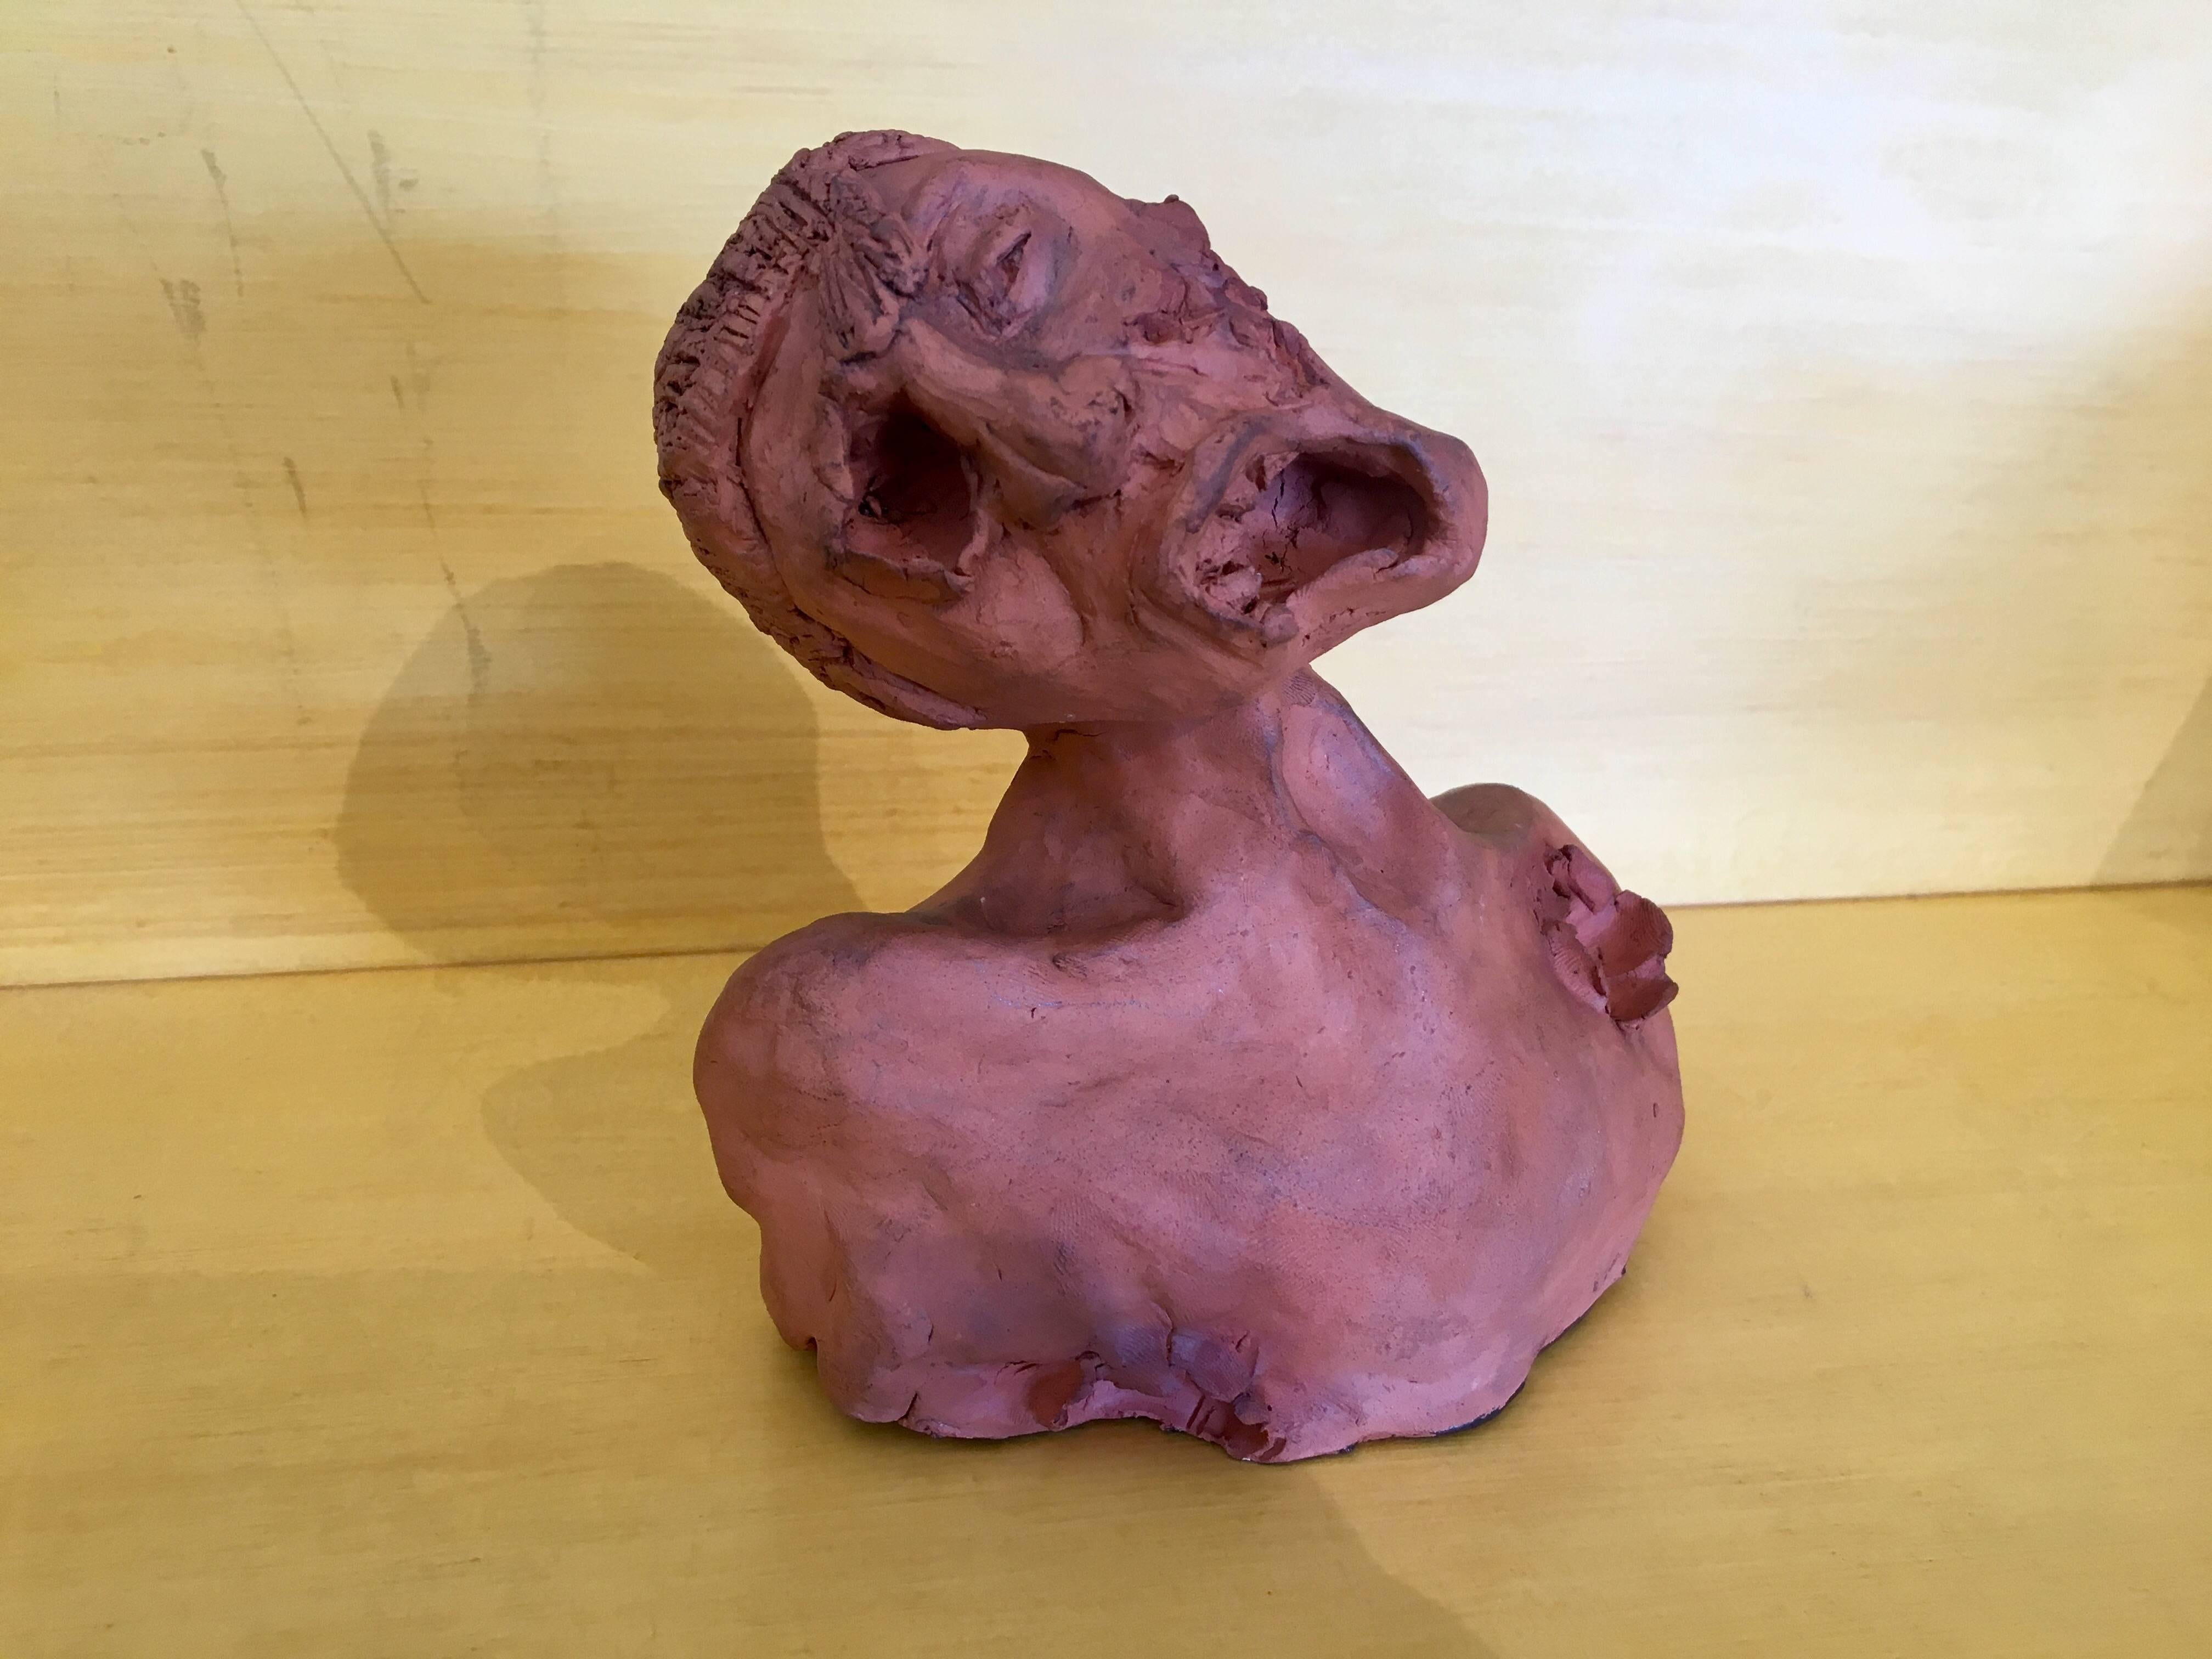 This writhing human figure may have been a student creation. Signed by J.W., the contorted open mouth complete with teeth and tongue are very well done. One can almost feel his pain and anguish. 6" H.